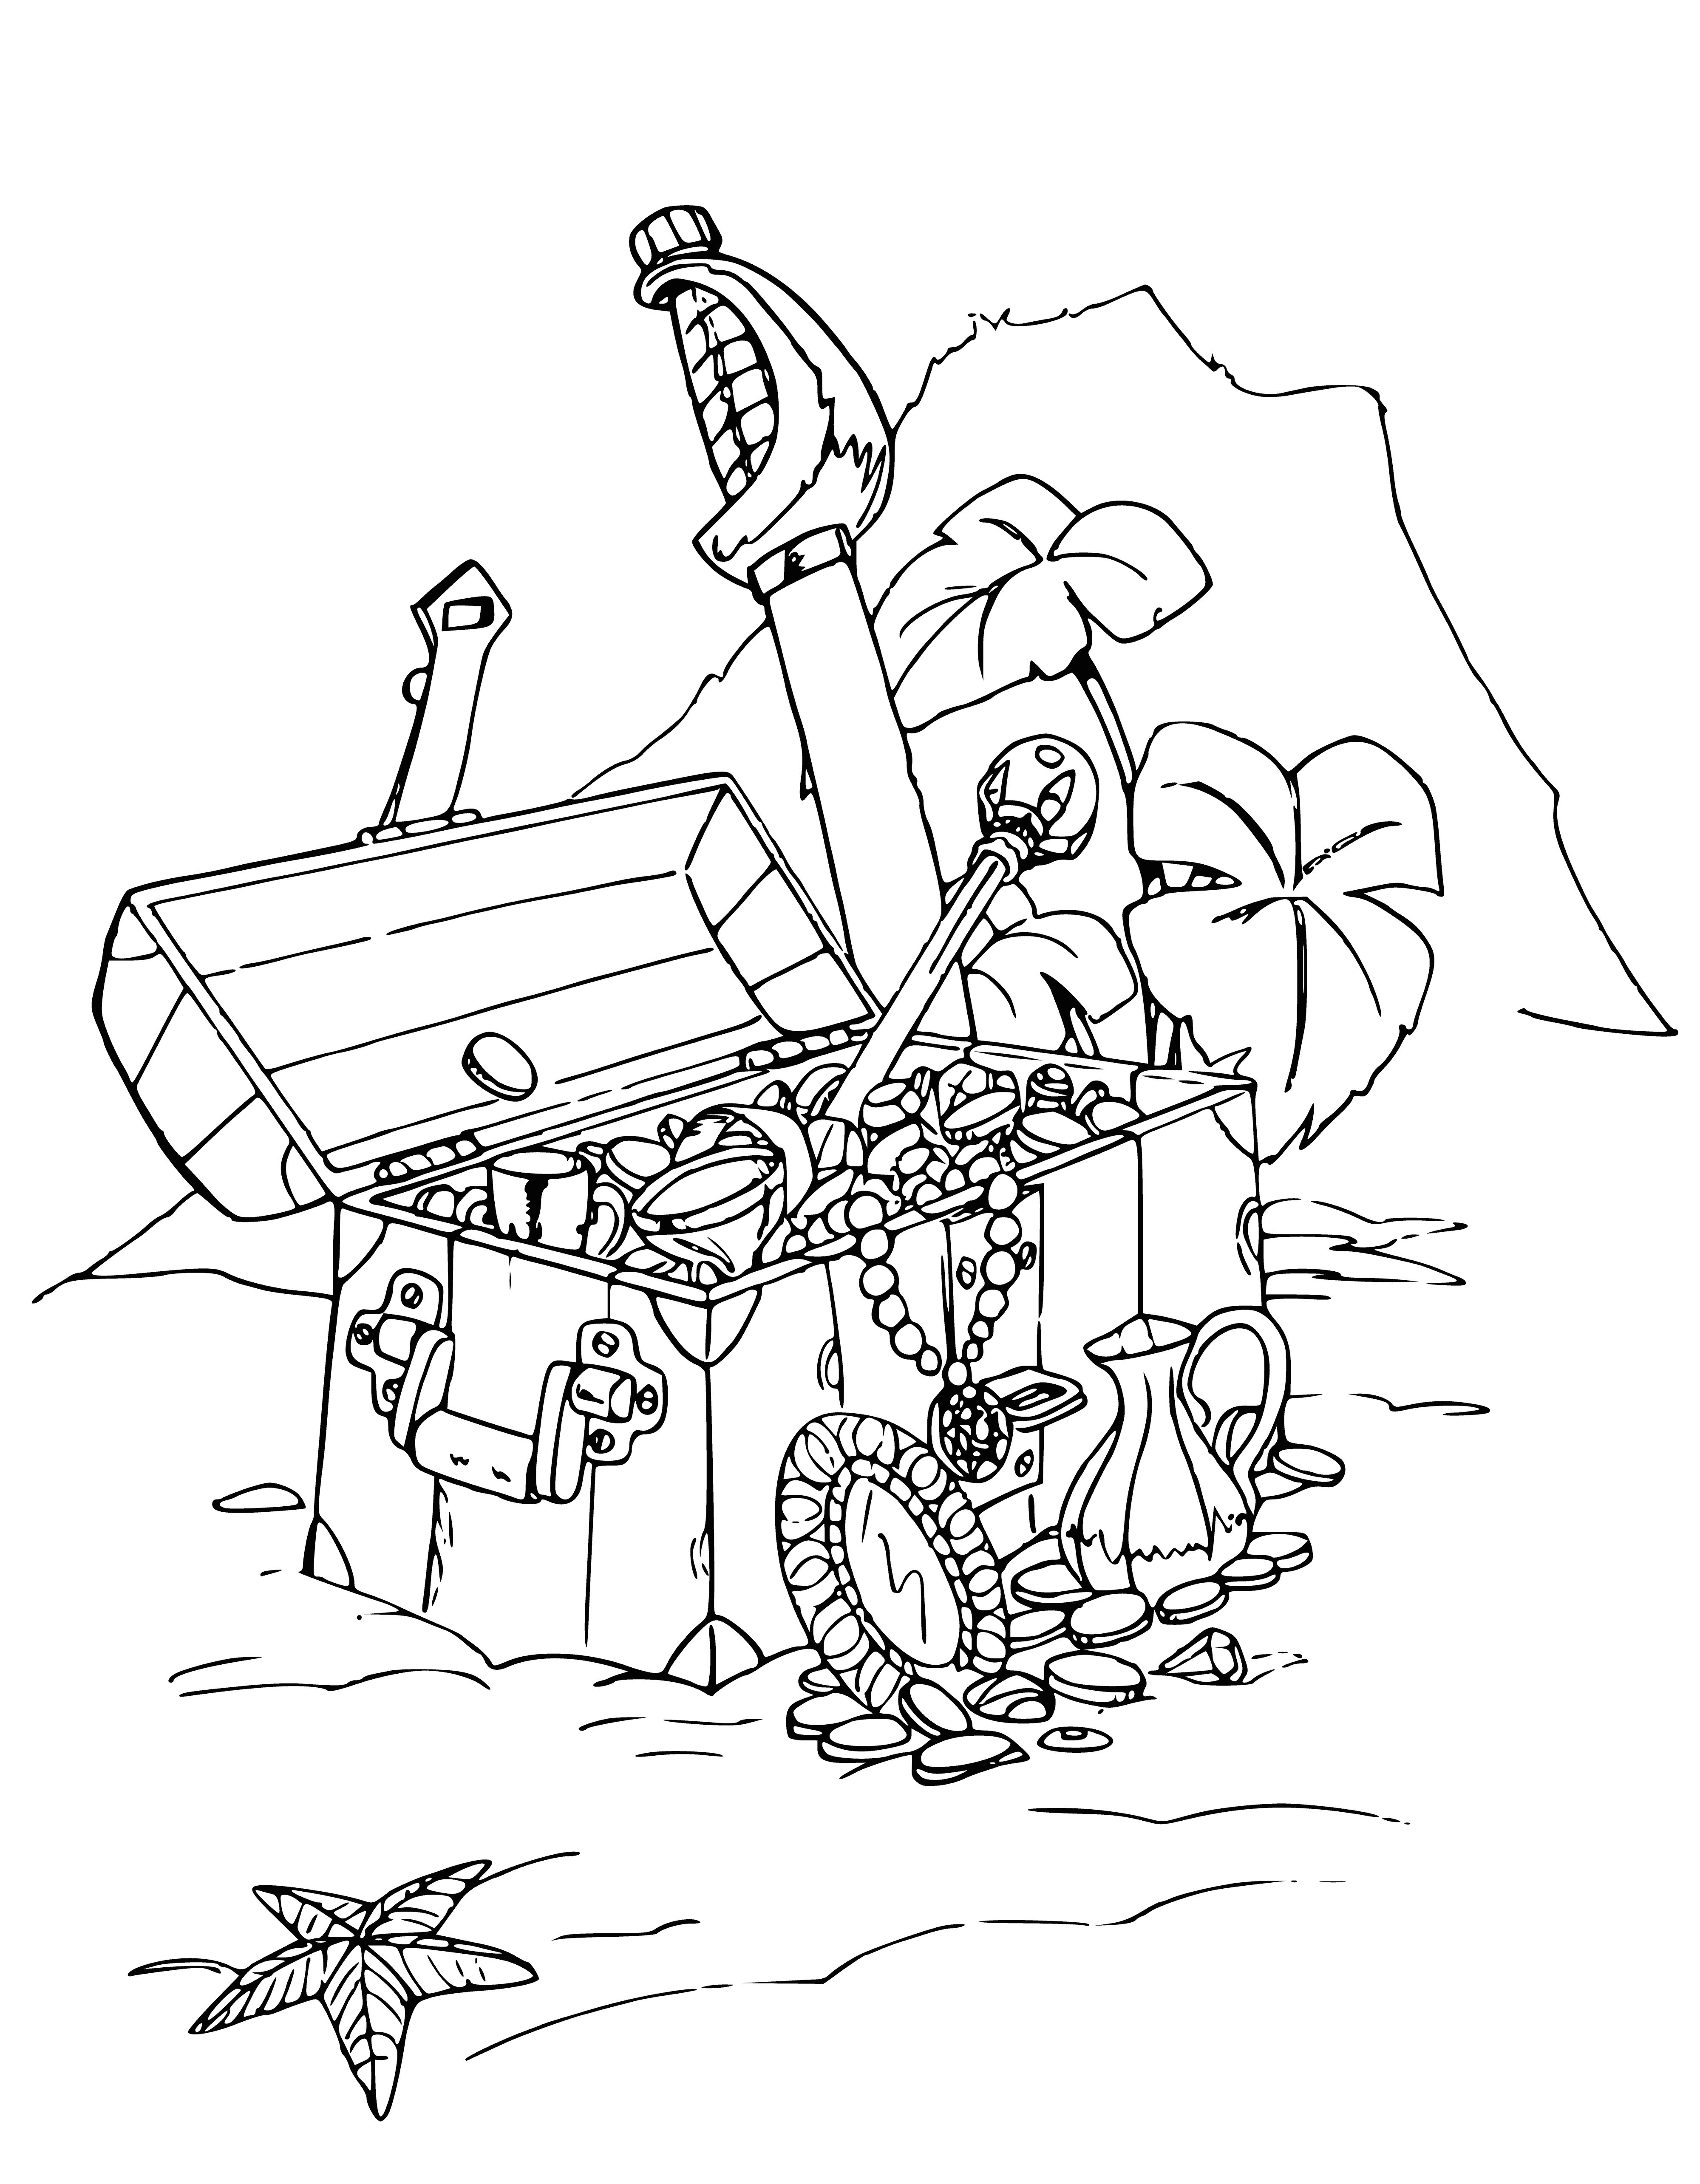 coloring page: Pirate opens chest to find treasure of gold coins, jewels, and more!